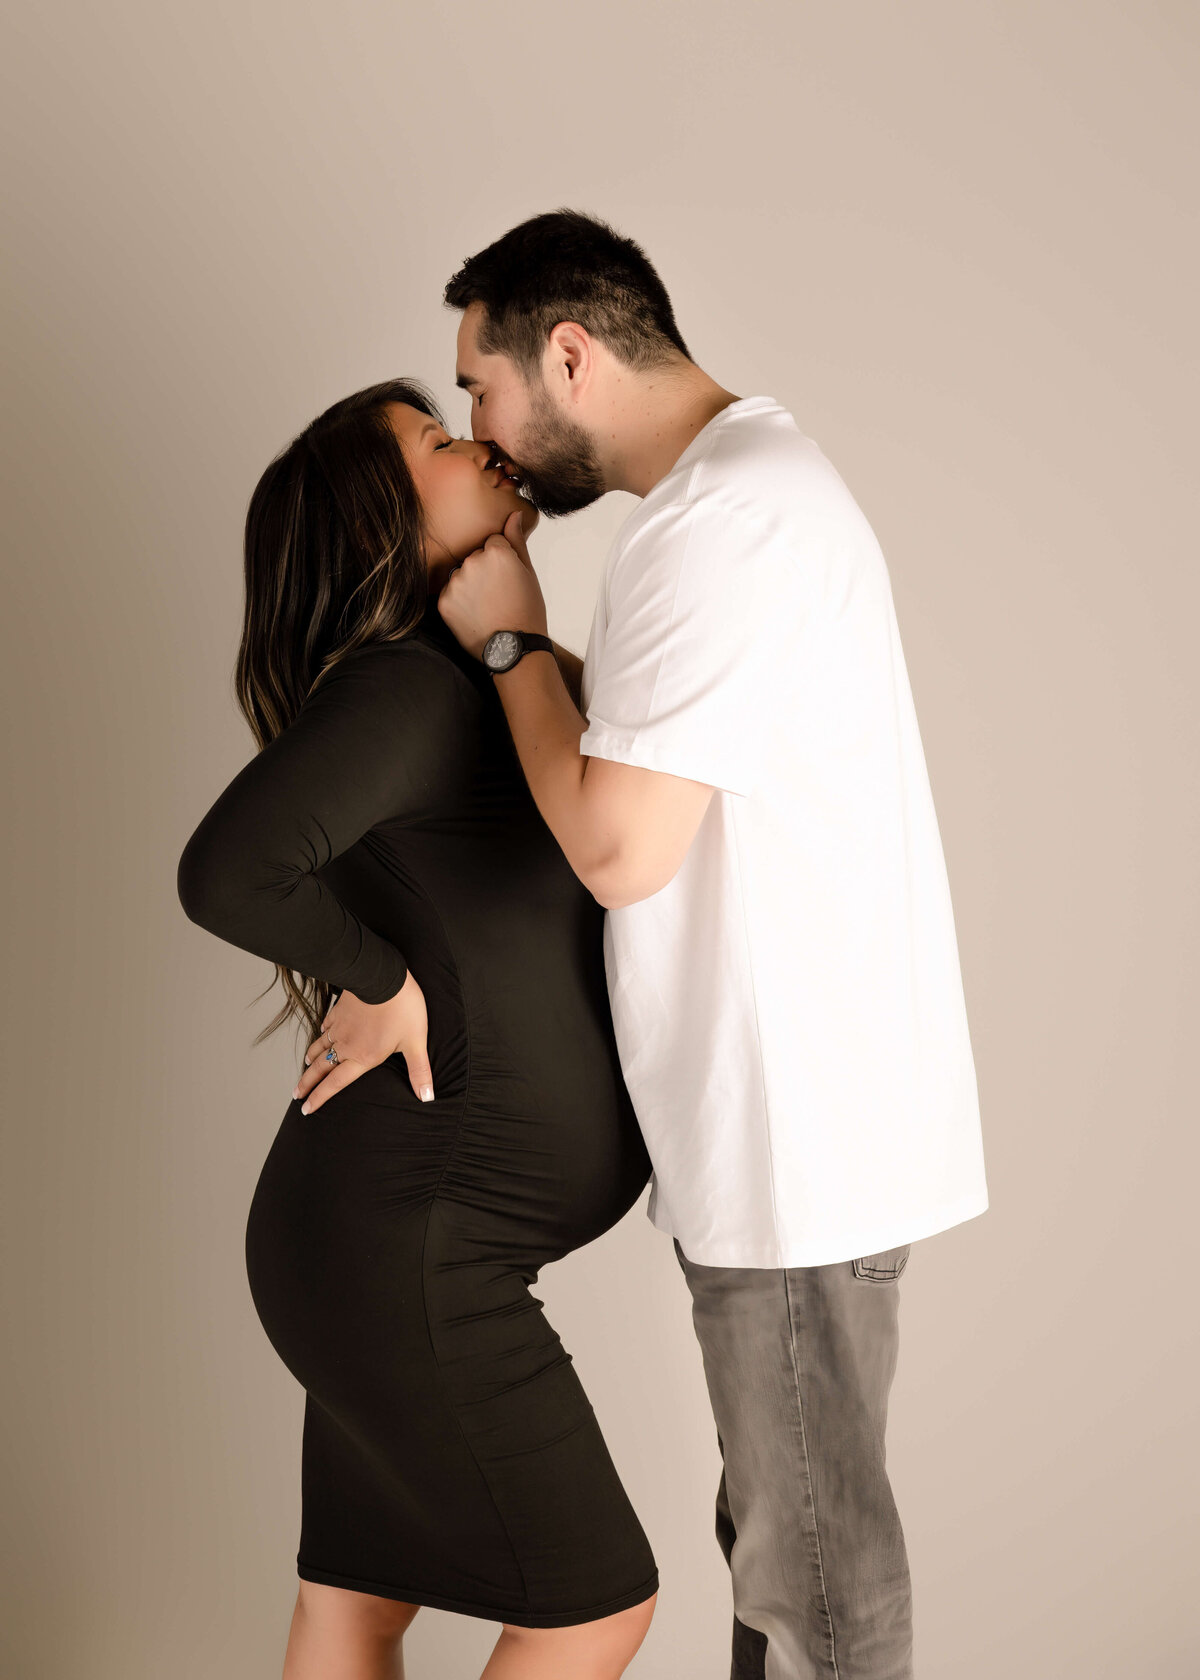 Husband holding wifes chin while giving her a kiss in maternity session in studio by Ashley Nicole Photography.